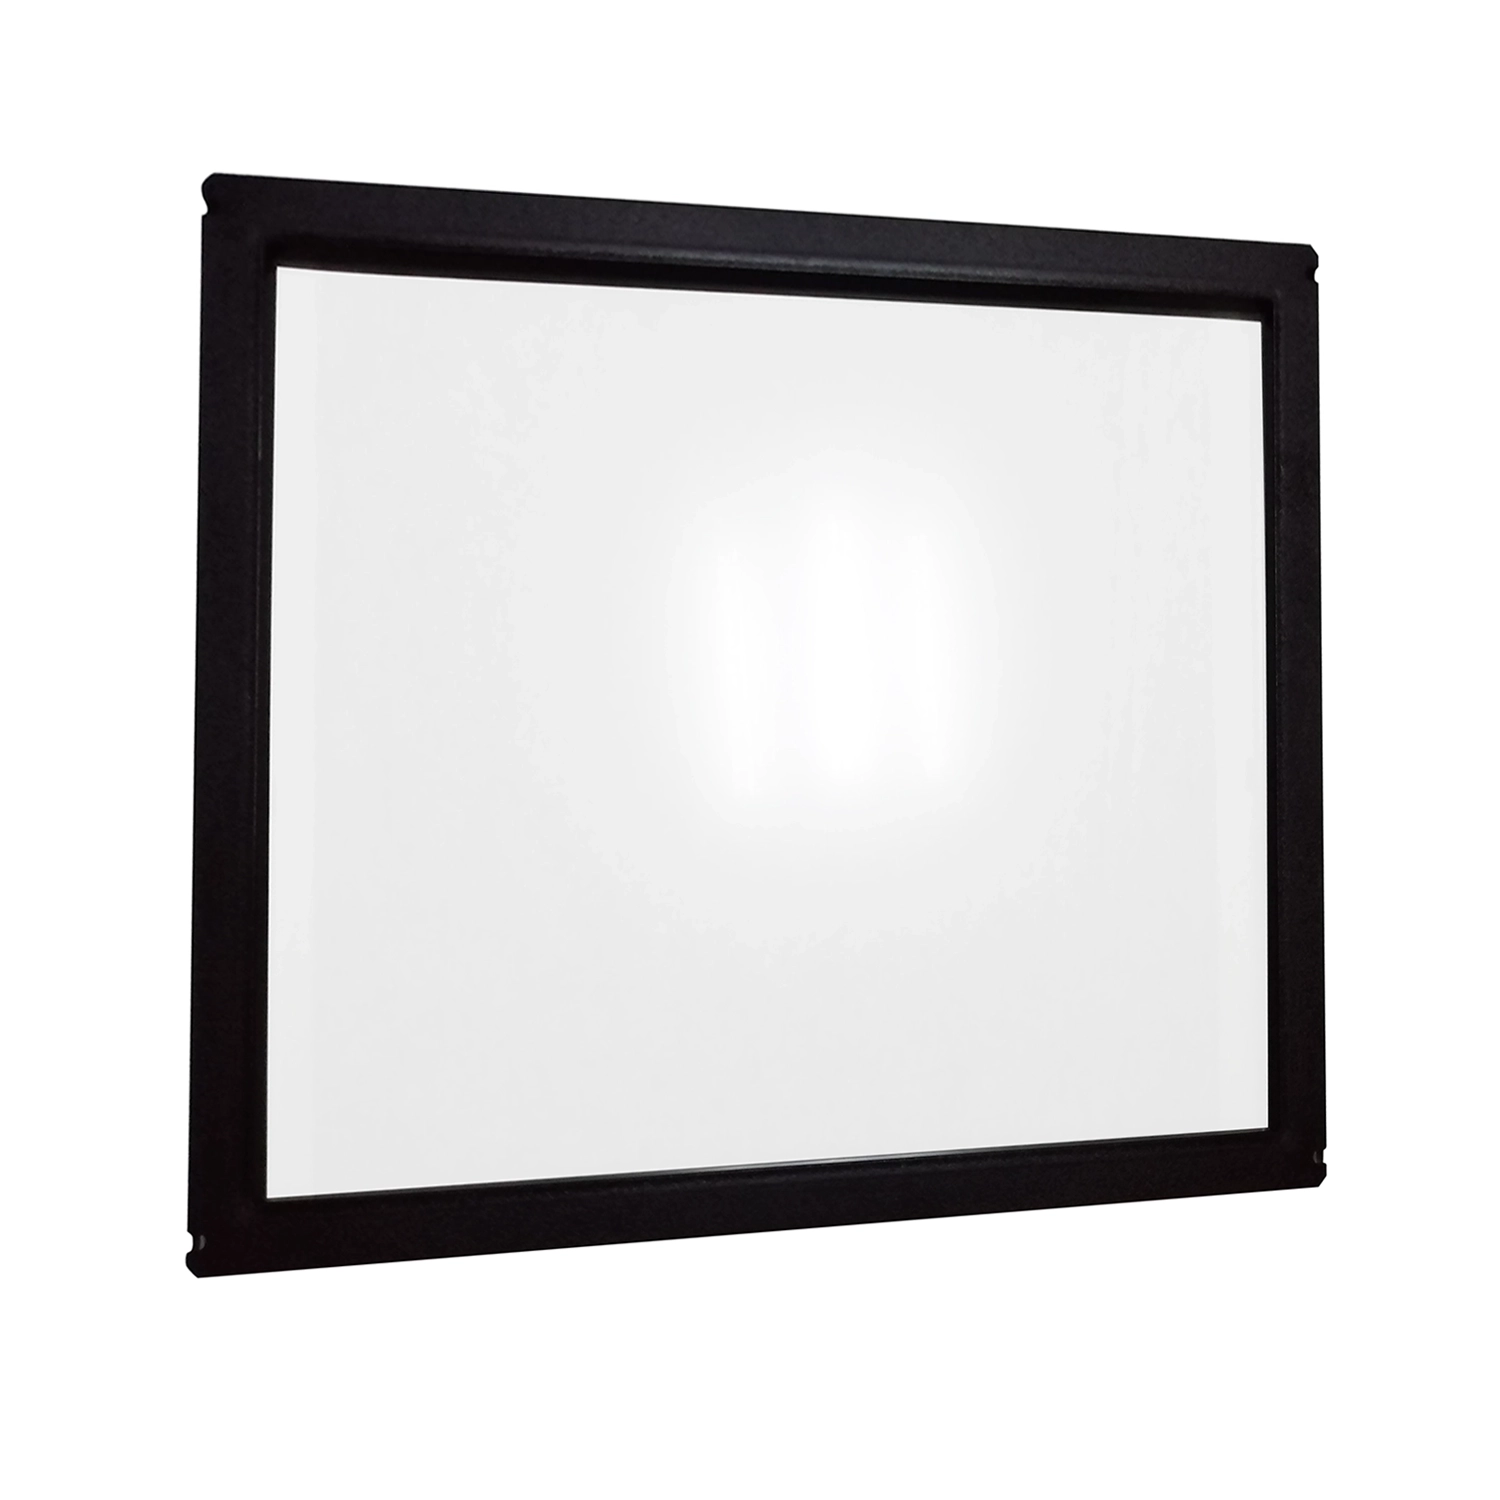 TOUCH FRAME WITH GLASS KEETOUCH 17" KP-170-IW2S0G1